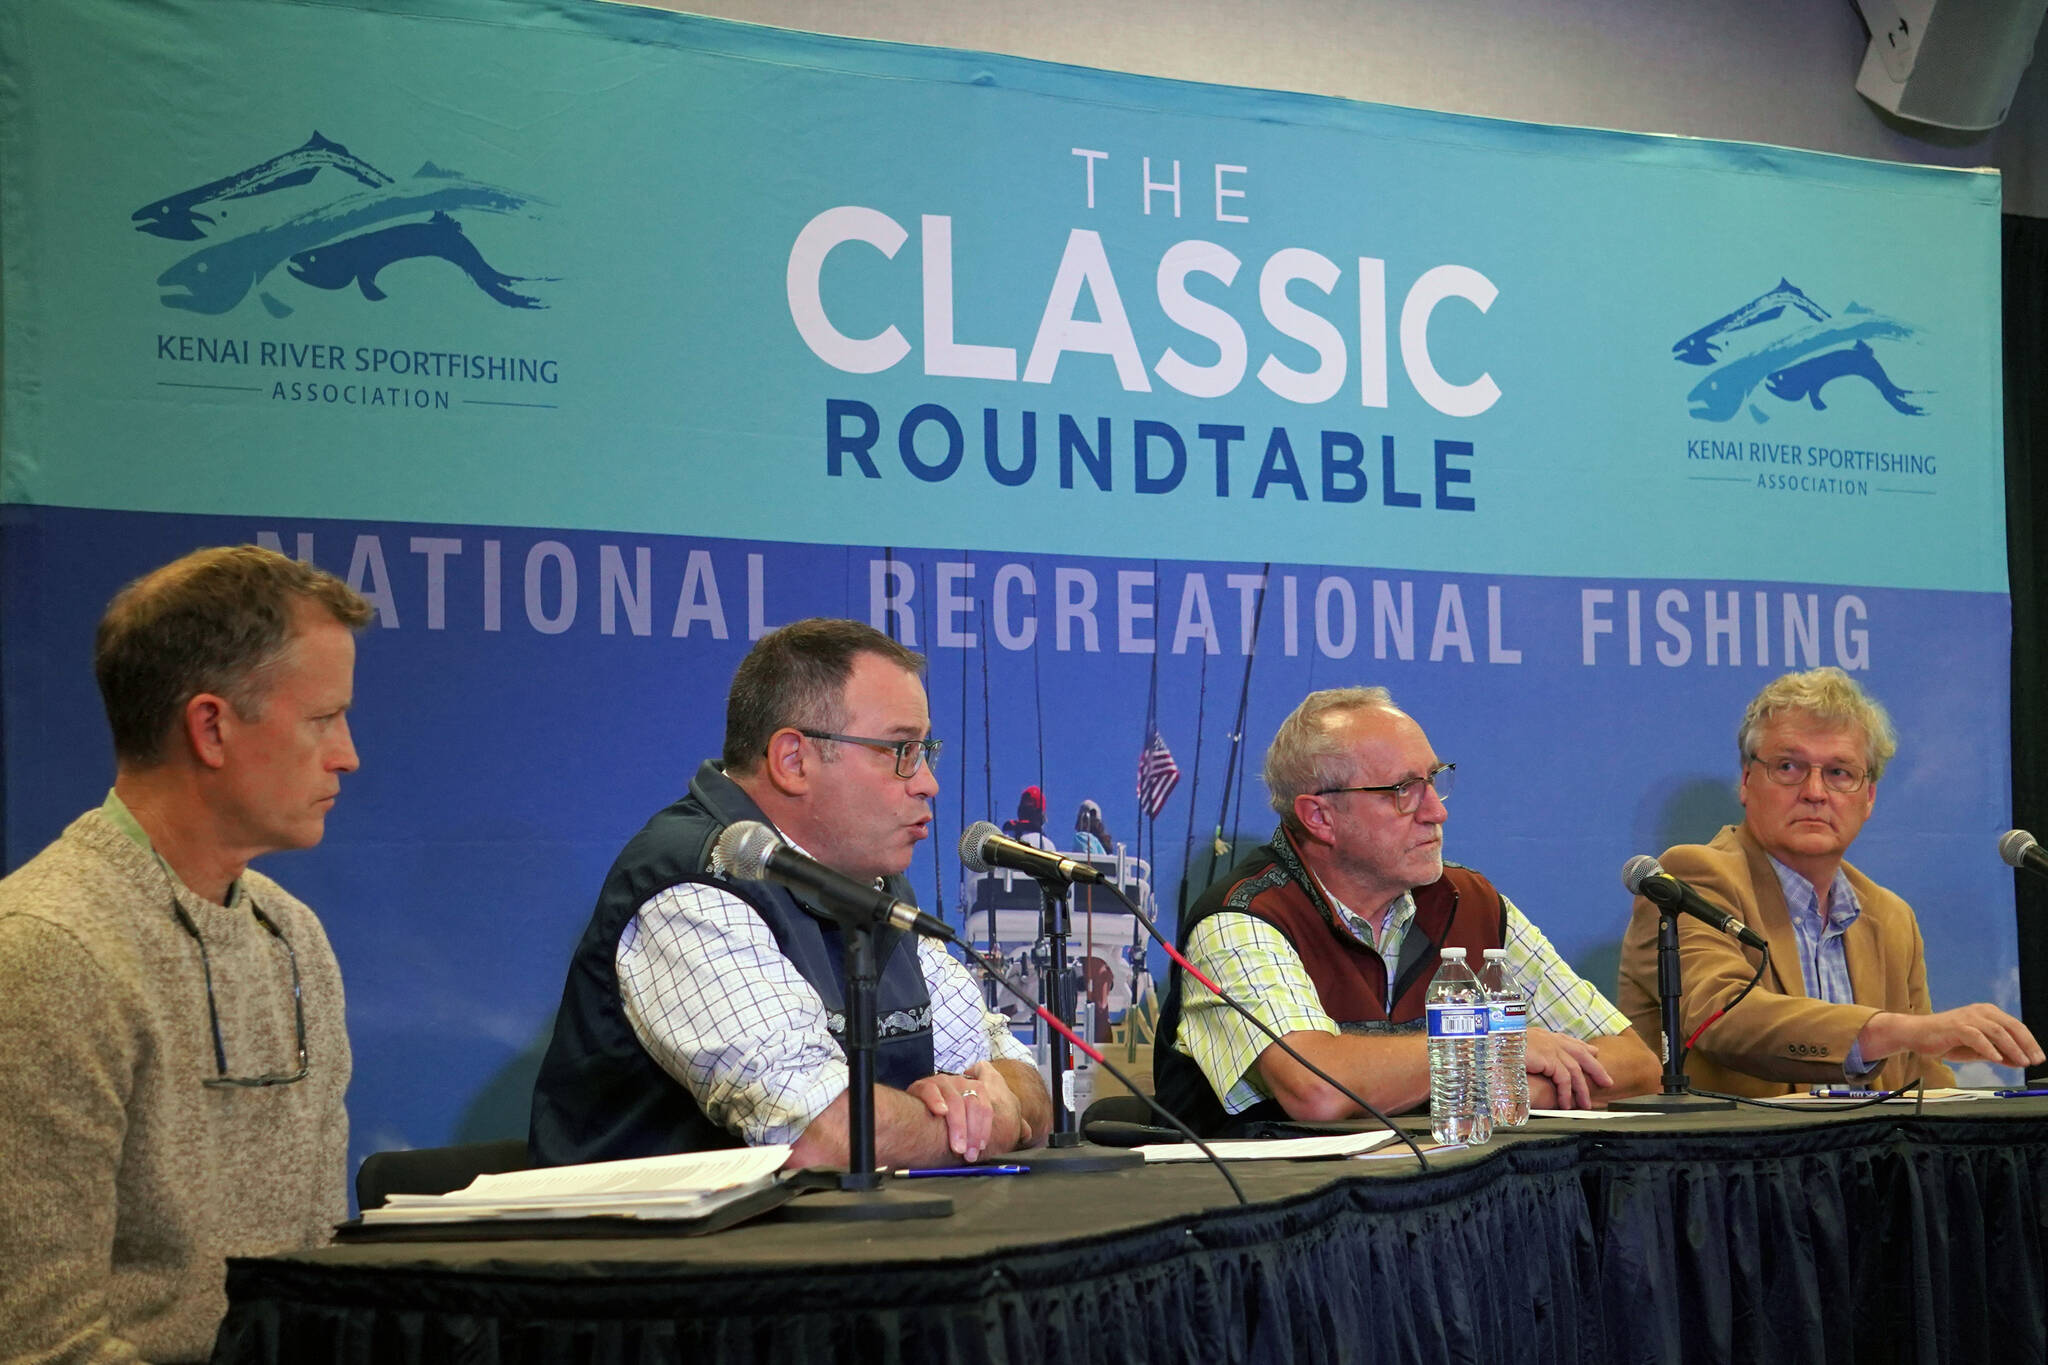 U.S. Fish and Wildlife Service Senior Advisor for Conservation Boyd Bilhovde, Bureau of Land Management Alaska Director Steve Cohn, Alaska Department of Fish and Game Commissioner Doug Vincent-Lang and Alaska State Parks Director Ricky Gease participate in a panel discussion at the Kenai River Sportfishing Association’s Kenai Classic Roundtable at the Soldotna Regional Sports Complex in Soldotna, Alaska, on Wednesday, Aug. 23, 2023. (Jake Dye/Peninsula Clarion)